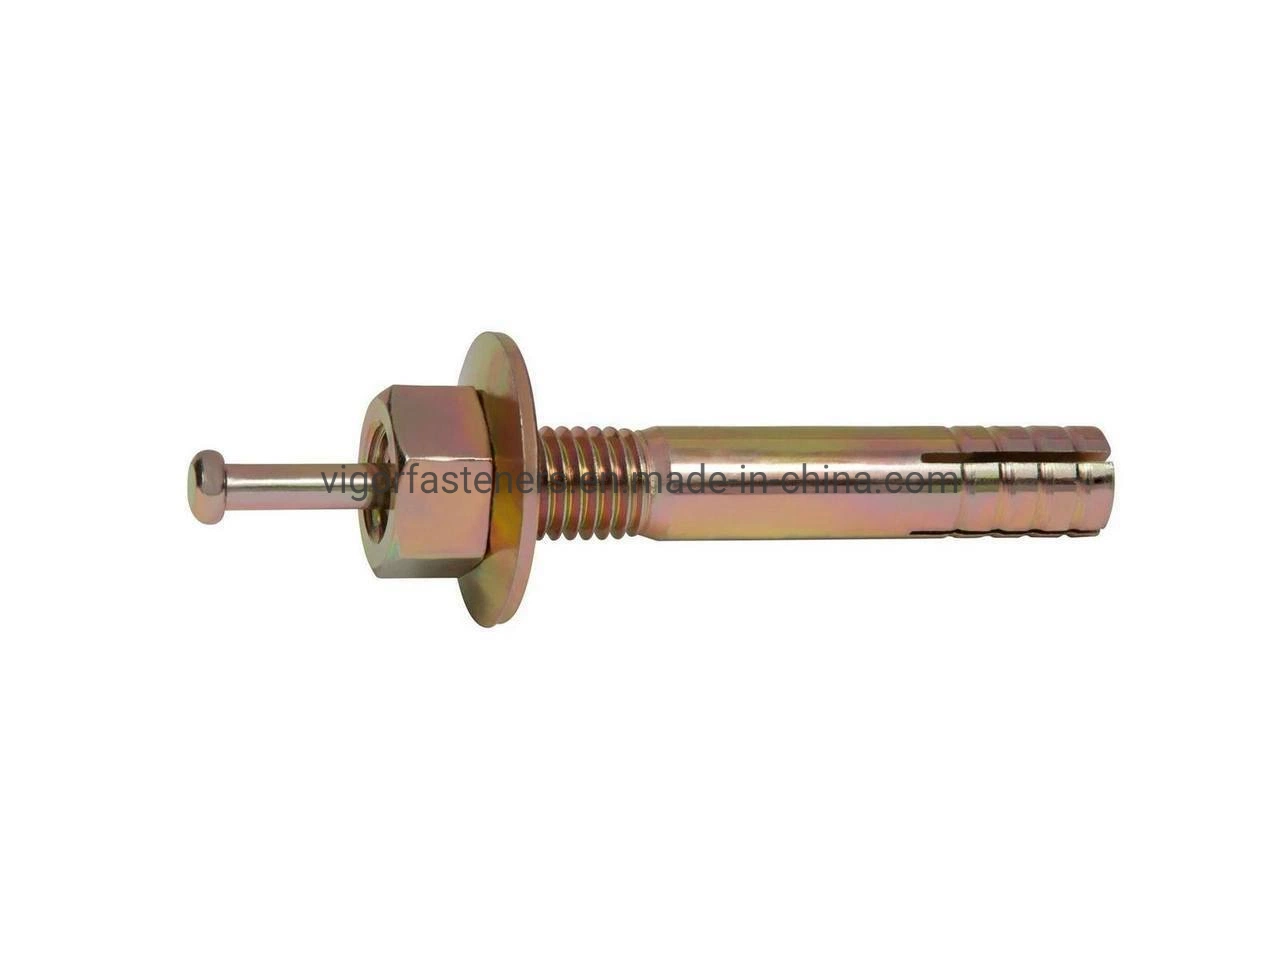 M6-M20 Carbon Steel Hit Anchor Bolt with Yellow/White Zinc Plated for Construction Hammer Drive Anchor Expansion Anchor